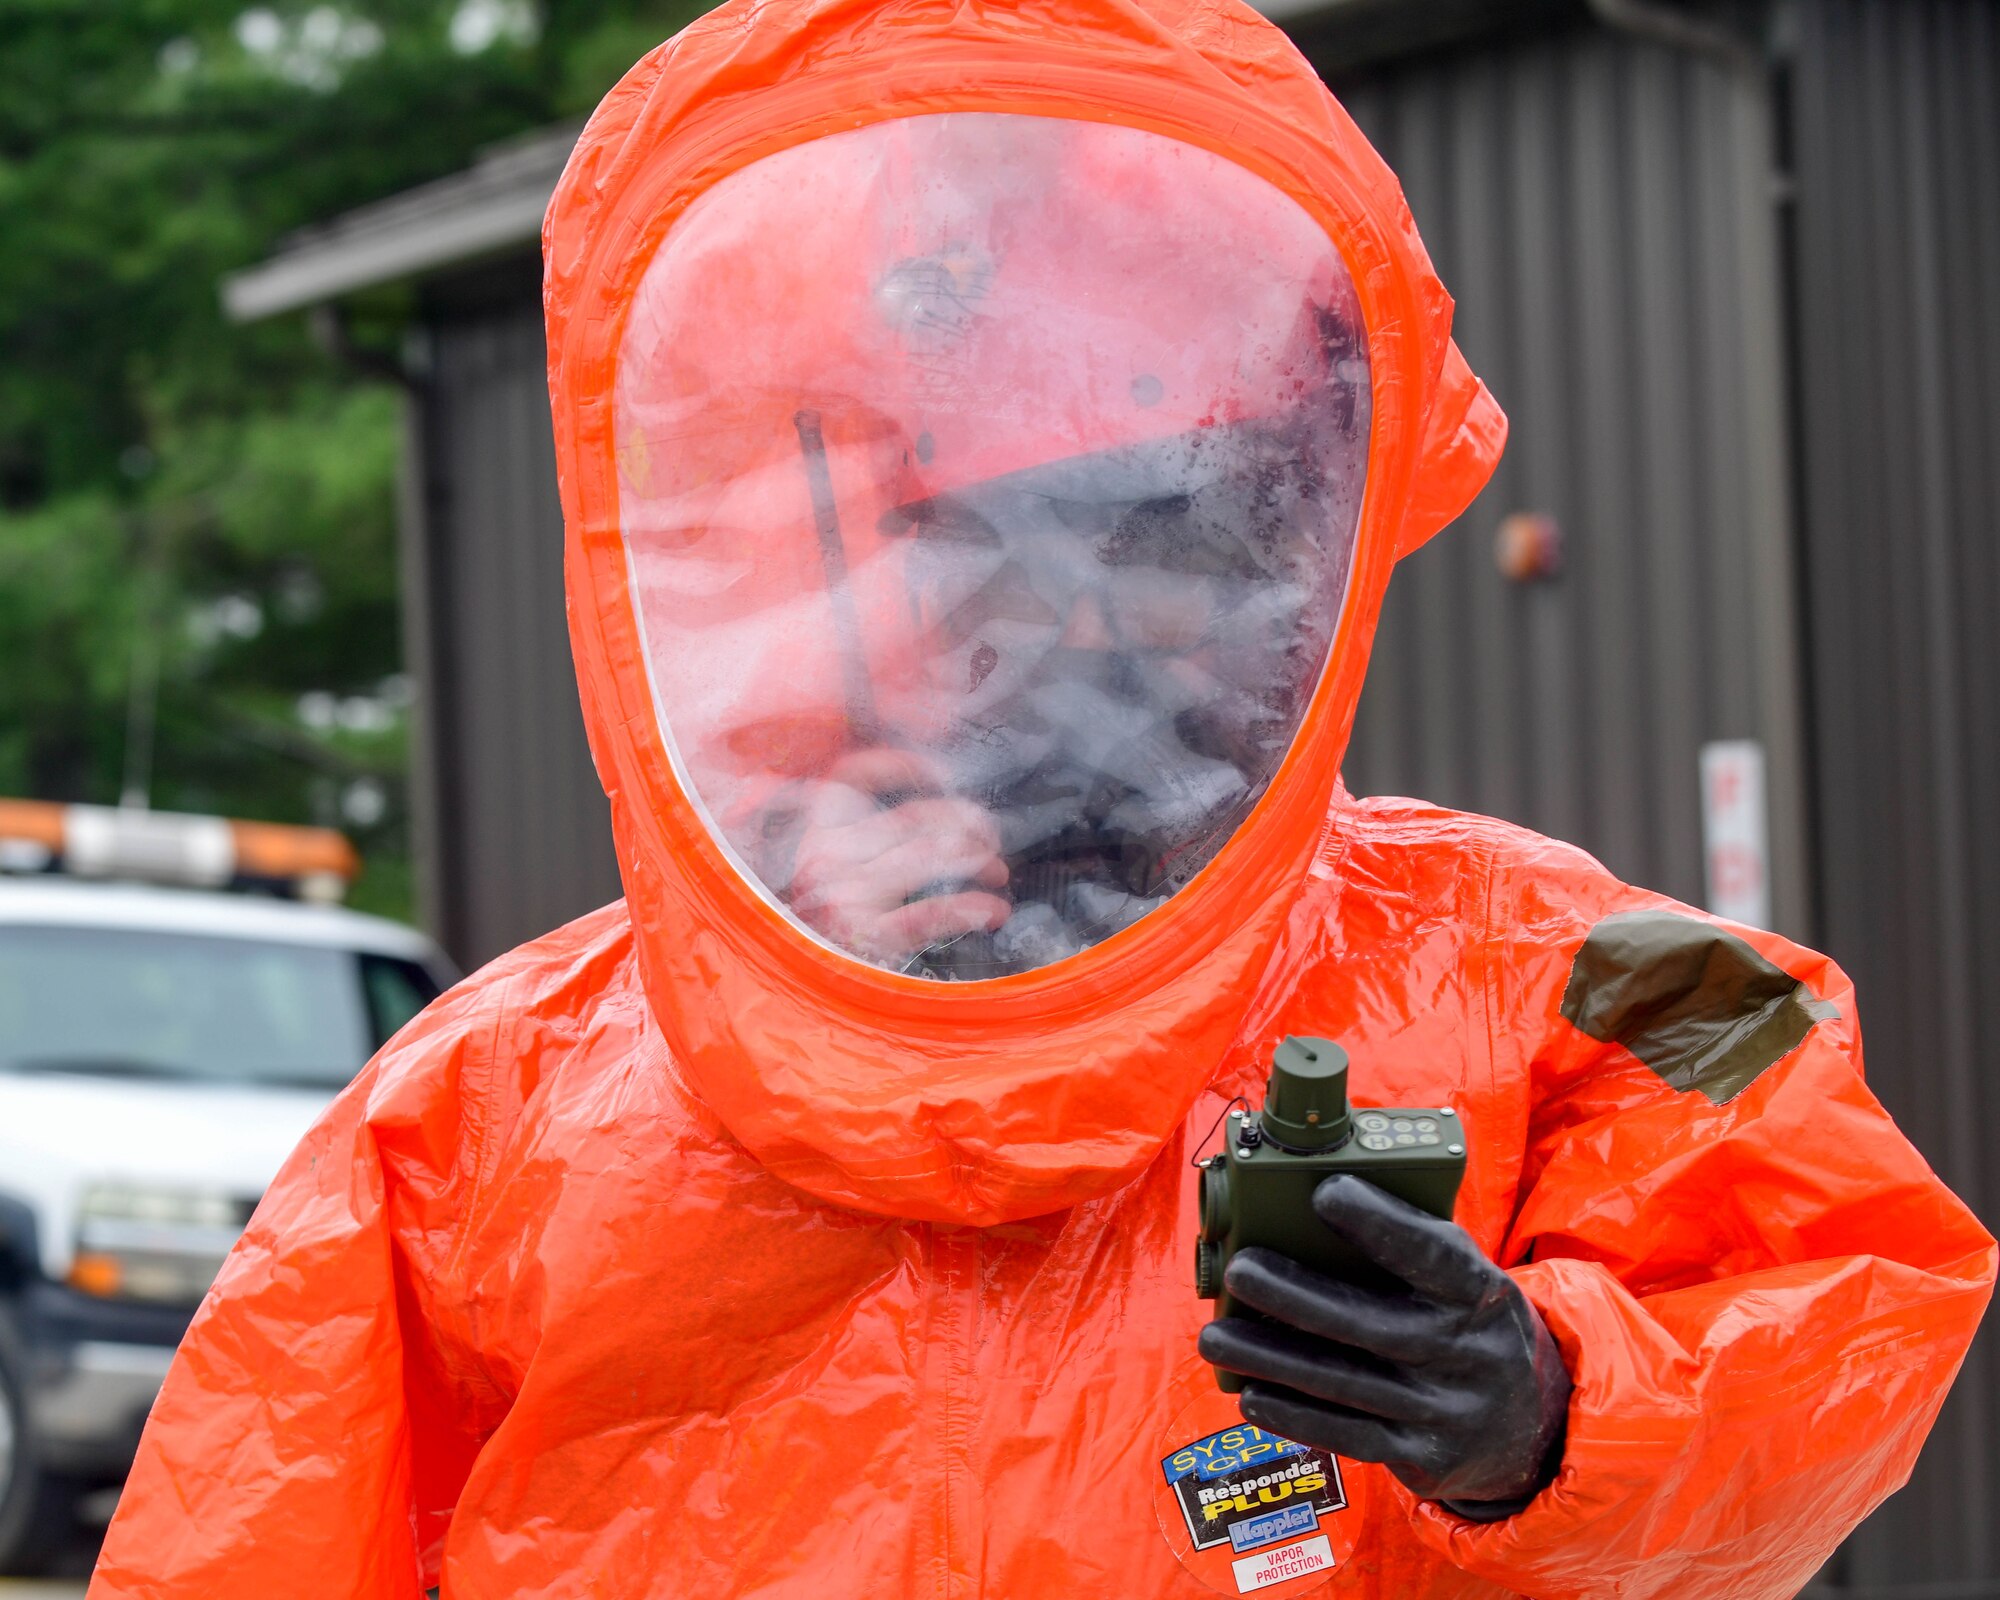 Maj. Paul Hoerig, an emergency management specialist assigned to 910th Civil Engineer Squadron here, uses a joint chemical agent detector to check for chemical agents in the area during a weapons of mass destruction exercise here, May 5, 2019.